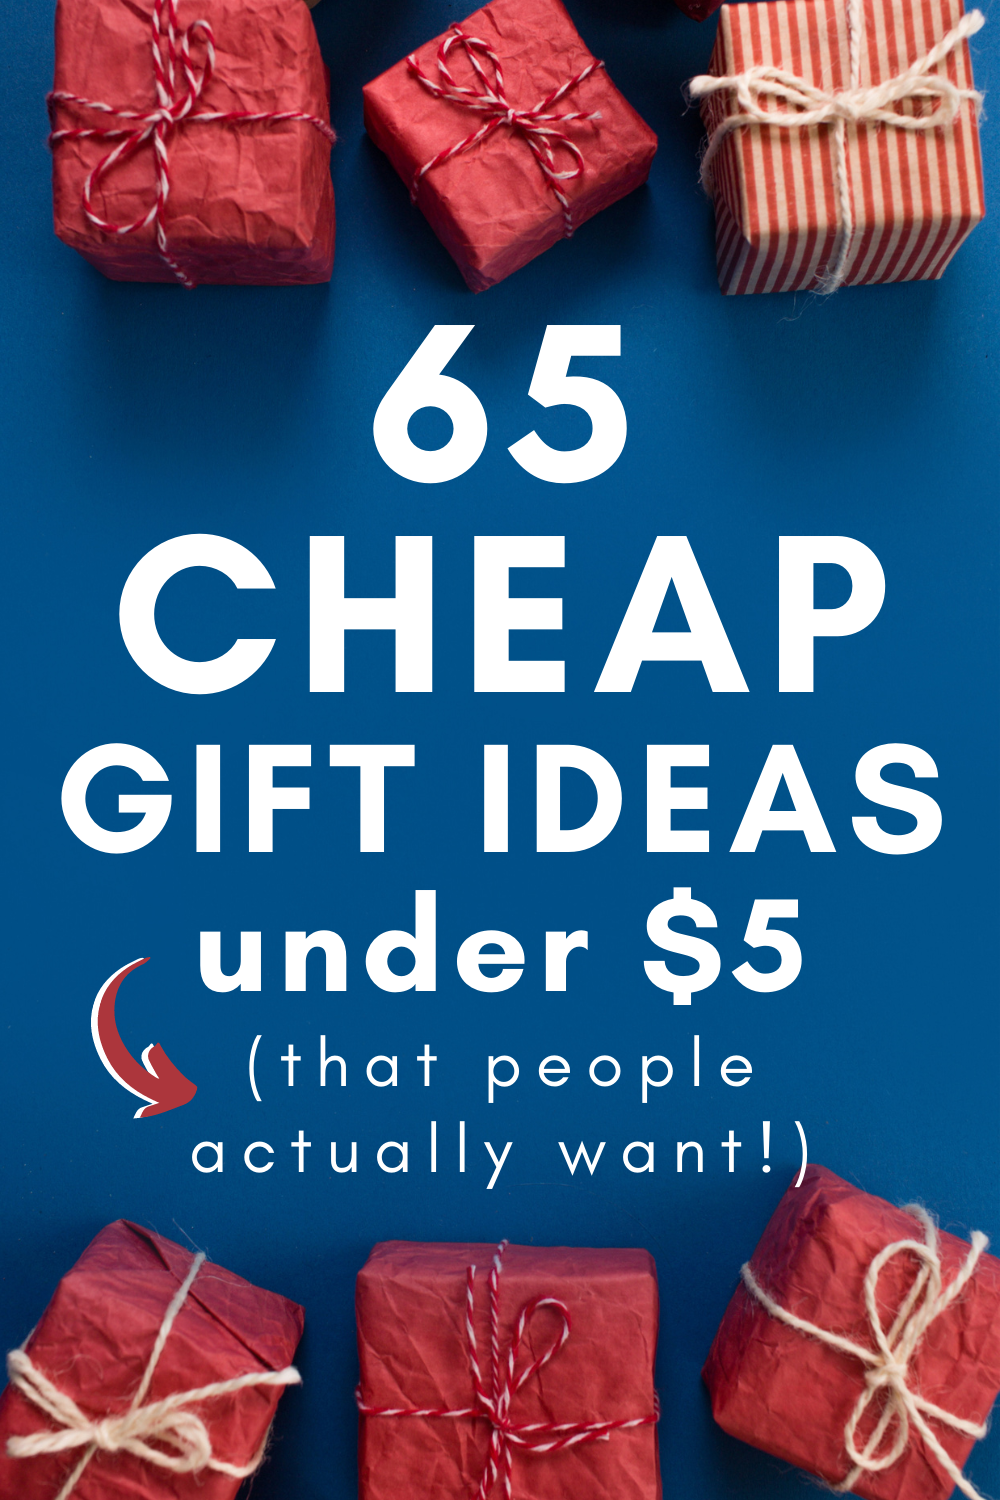 Best gifts under $5! These small cheap gift ideas are perfect for teachers, coworkers, employees, friends, or even family!